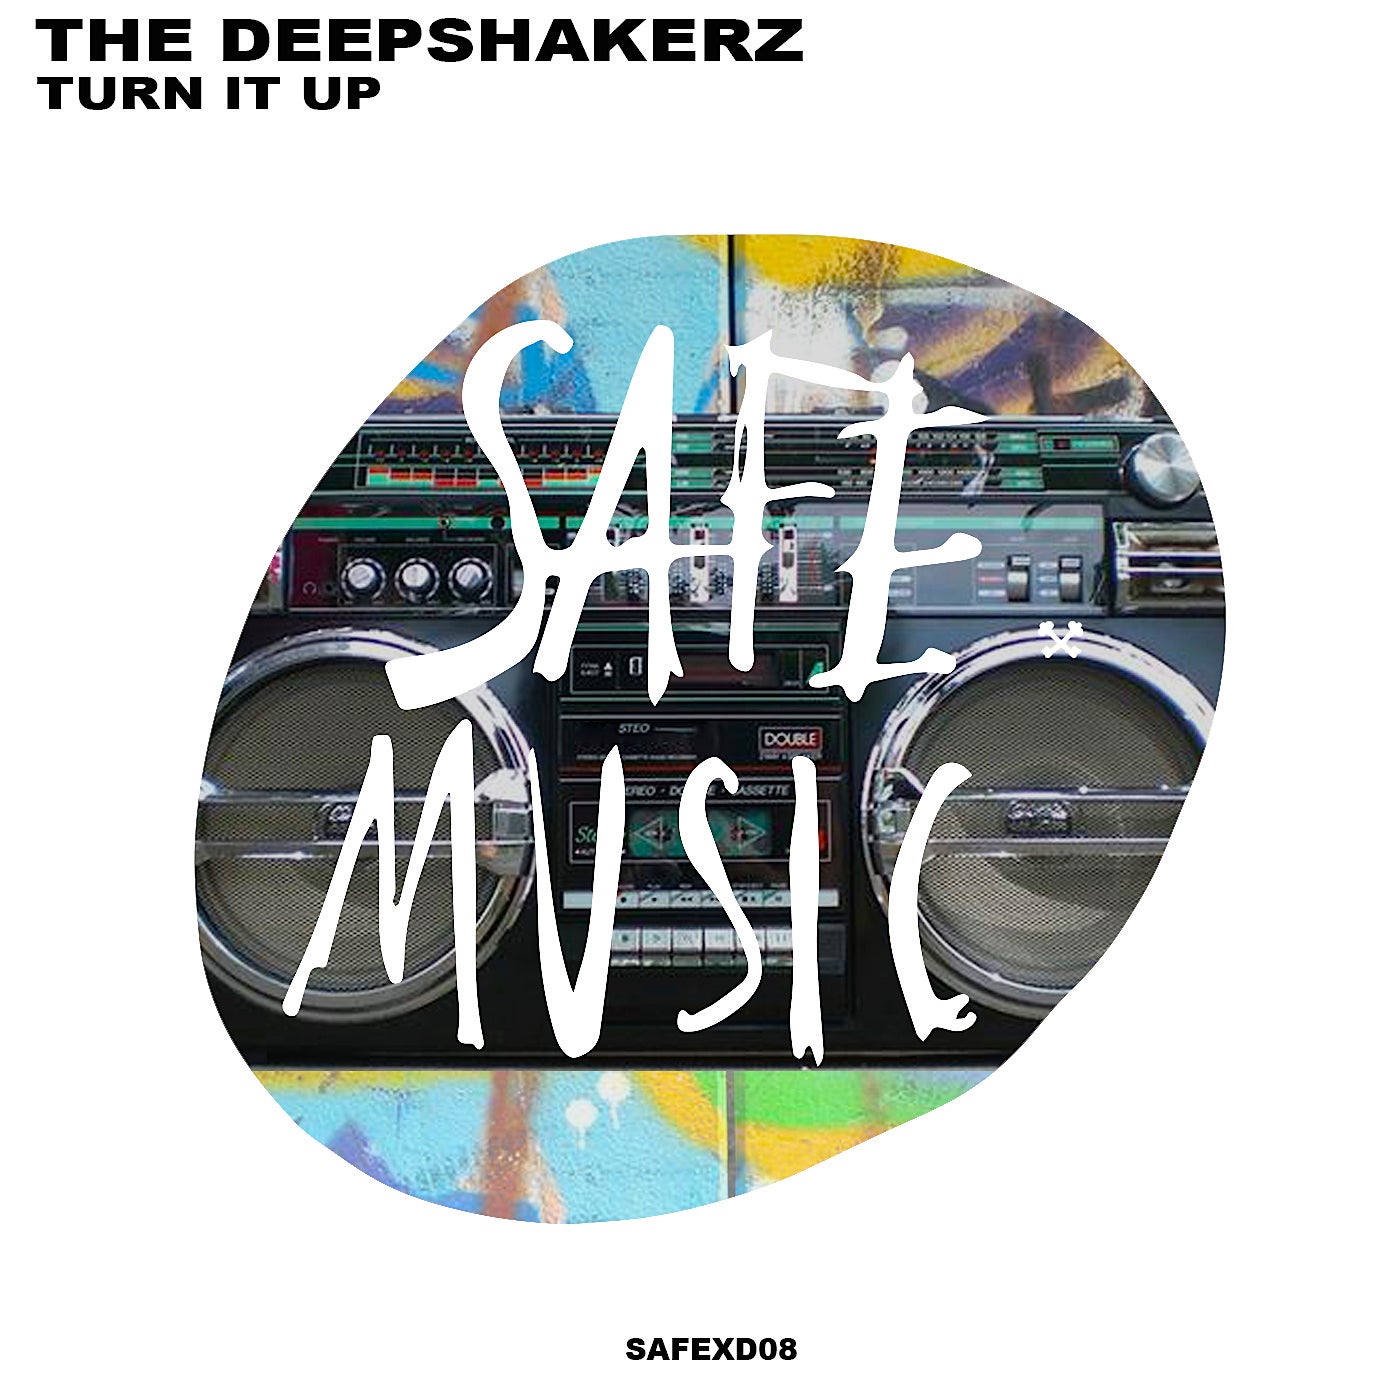 image cover: The Deepshakerz - Turn It Up / SAFEXD08